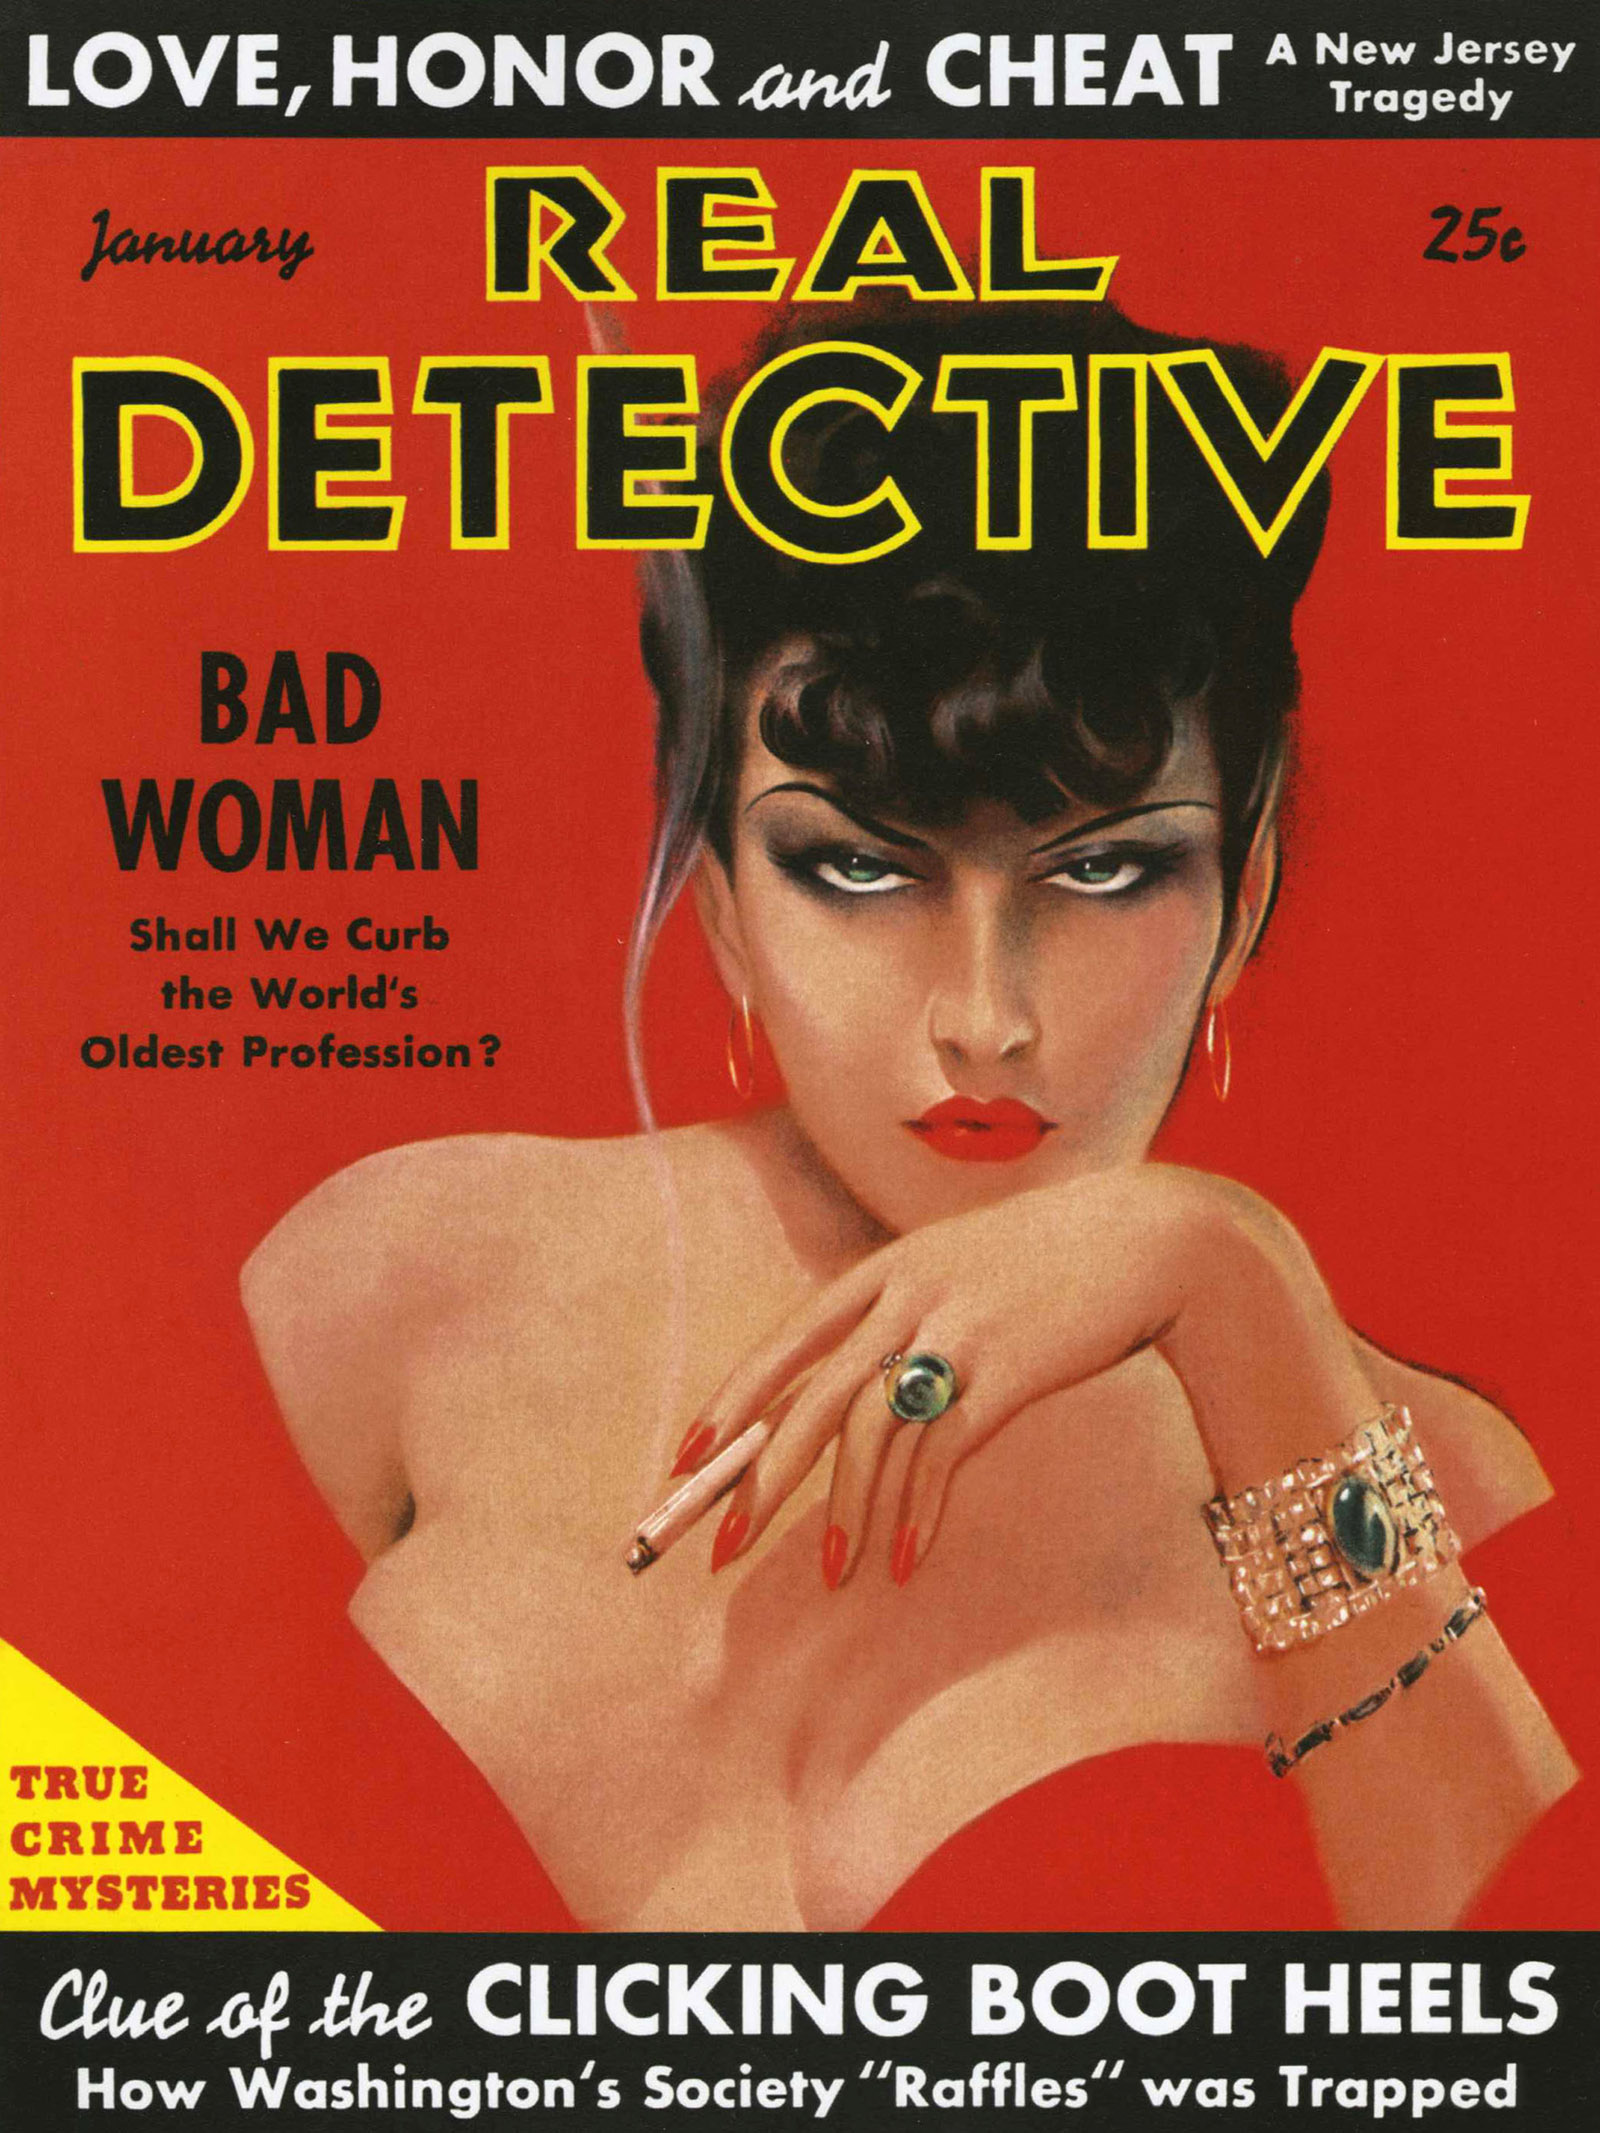 The cover of the January 1938 issue of Real Detective magazine